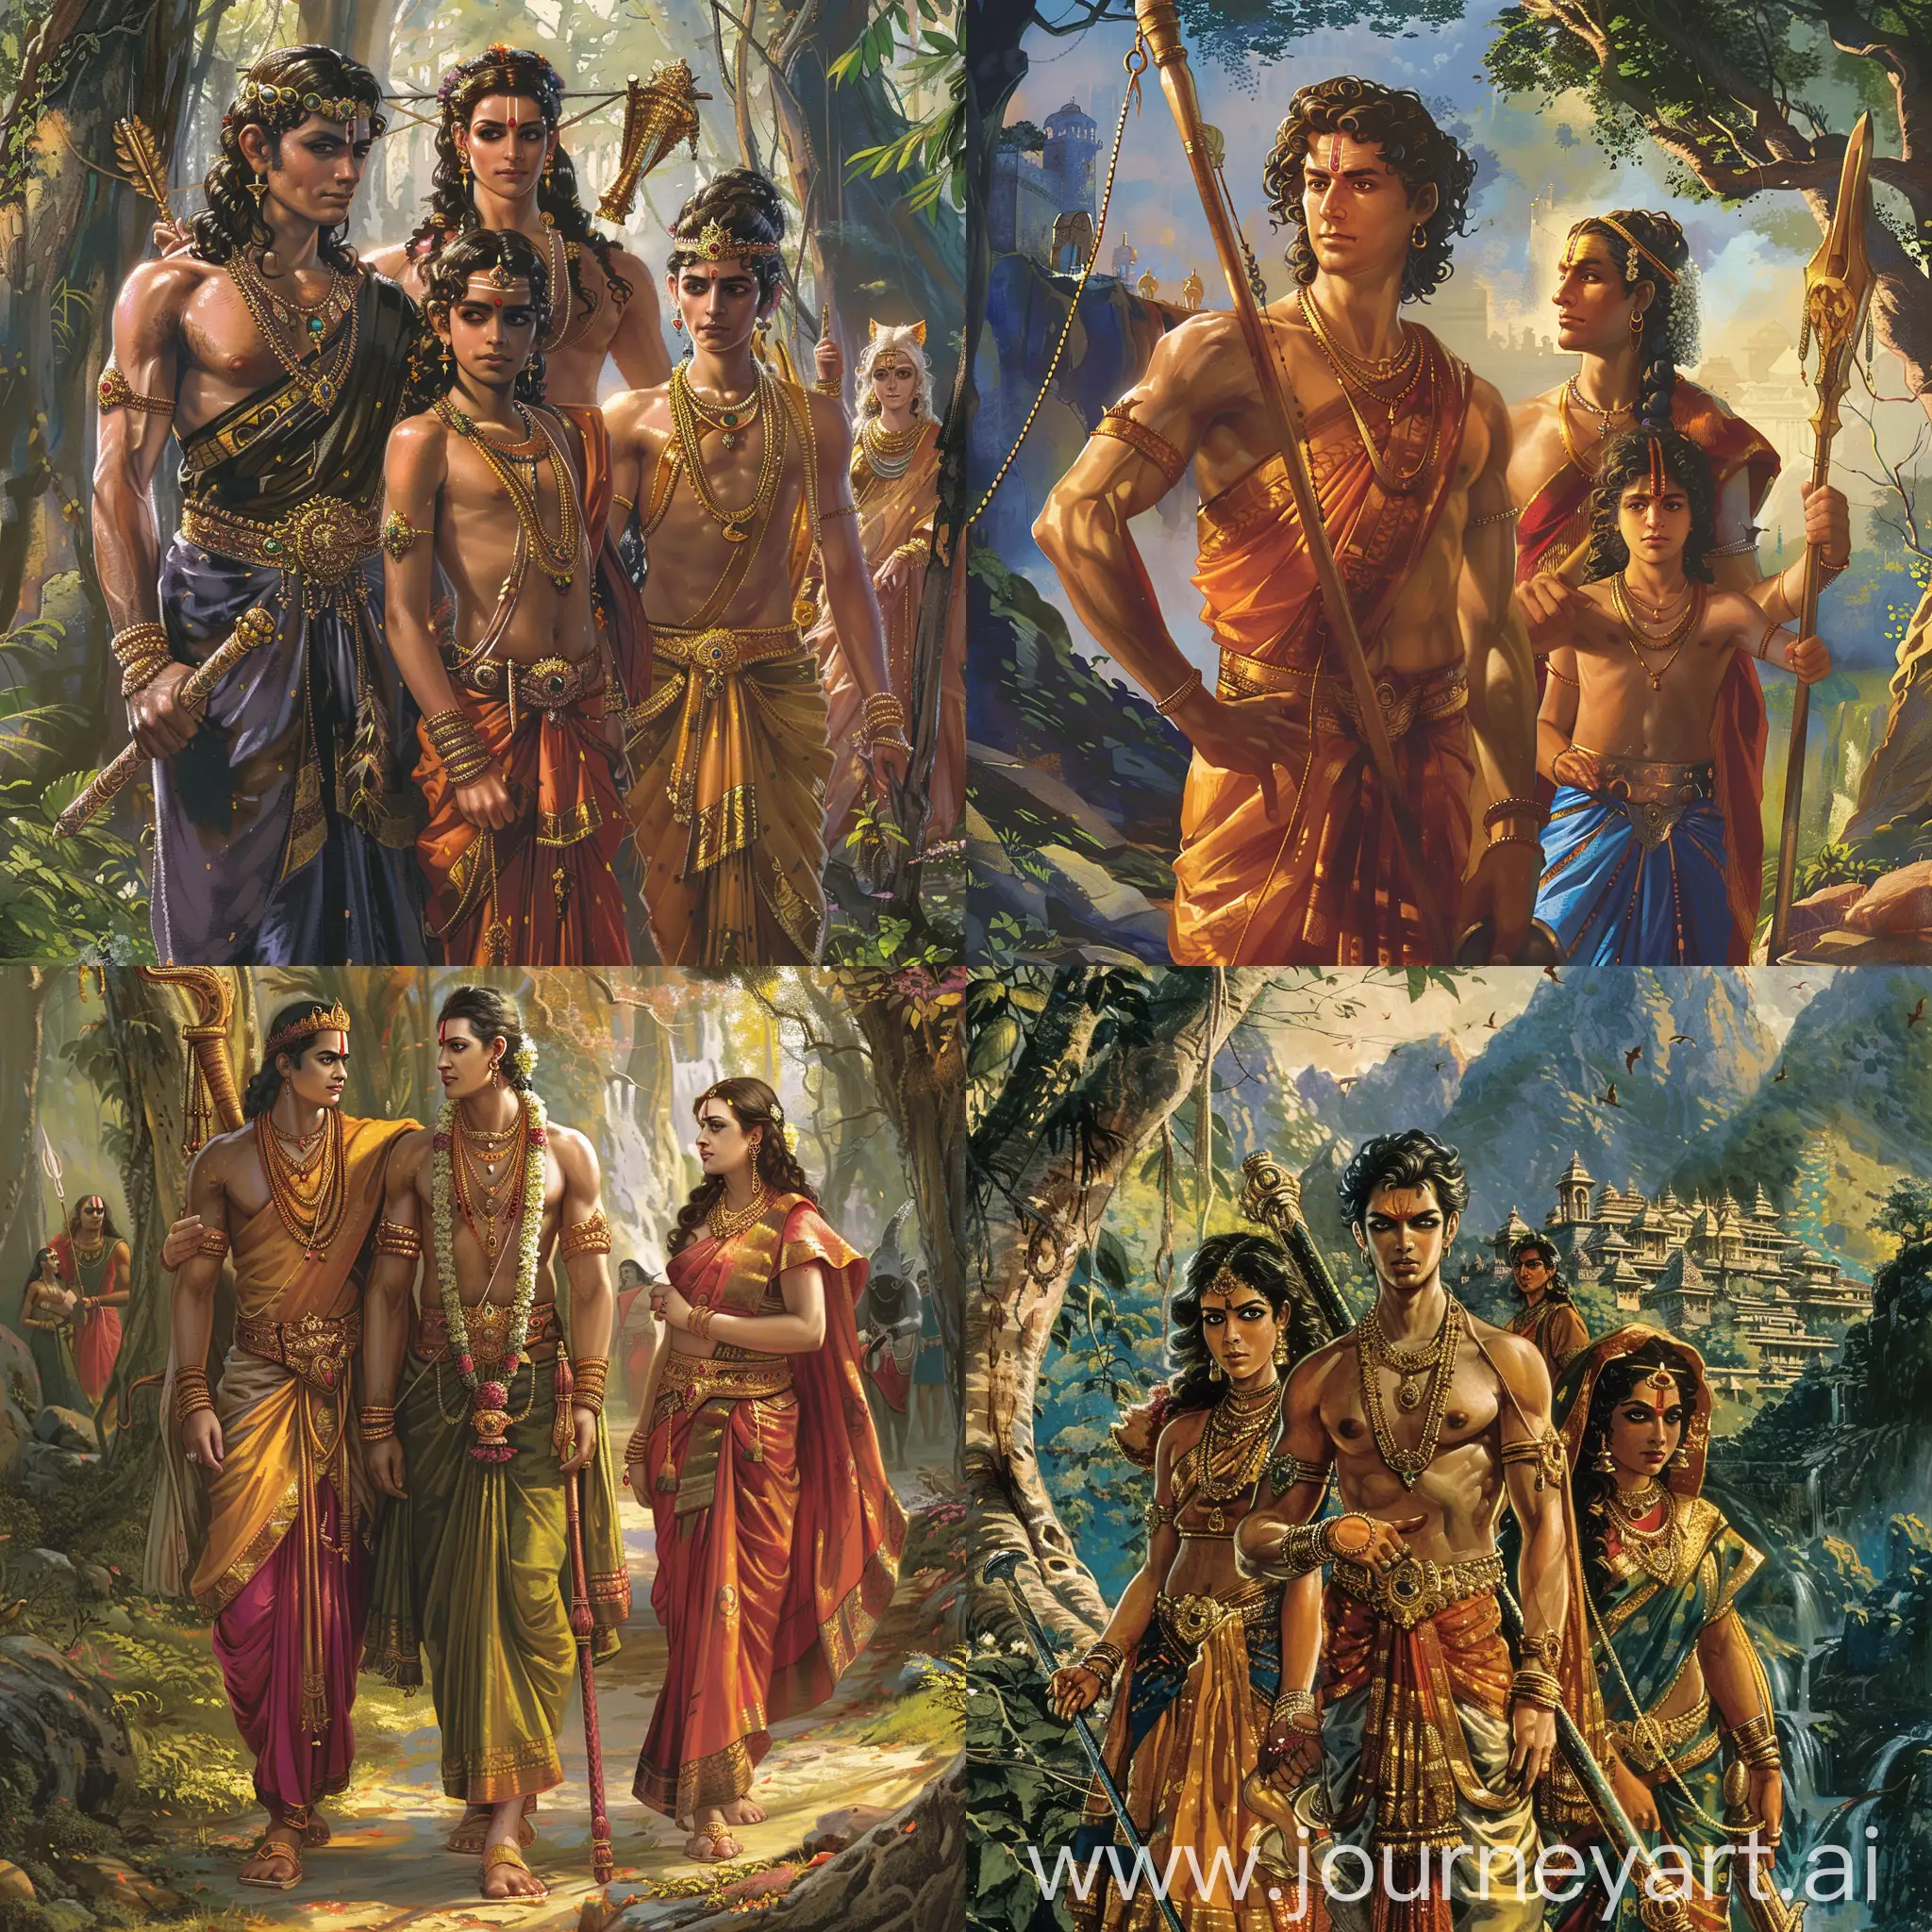 A Prince's Exile: King Dasharatha of Ayodhya has four sons, with Rama, the eldest, being the rightful heir. However, due to a series of unfortunate events and a queen's cunning wish, Rama is banished to the forest for fourteen years along with his wife Sita and loyal brother Lakshmana.